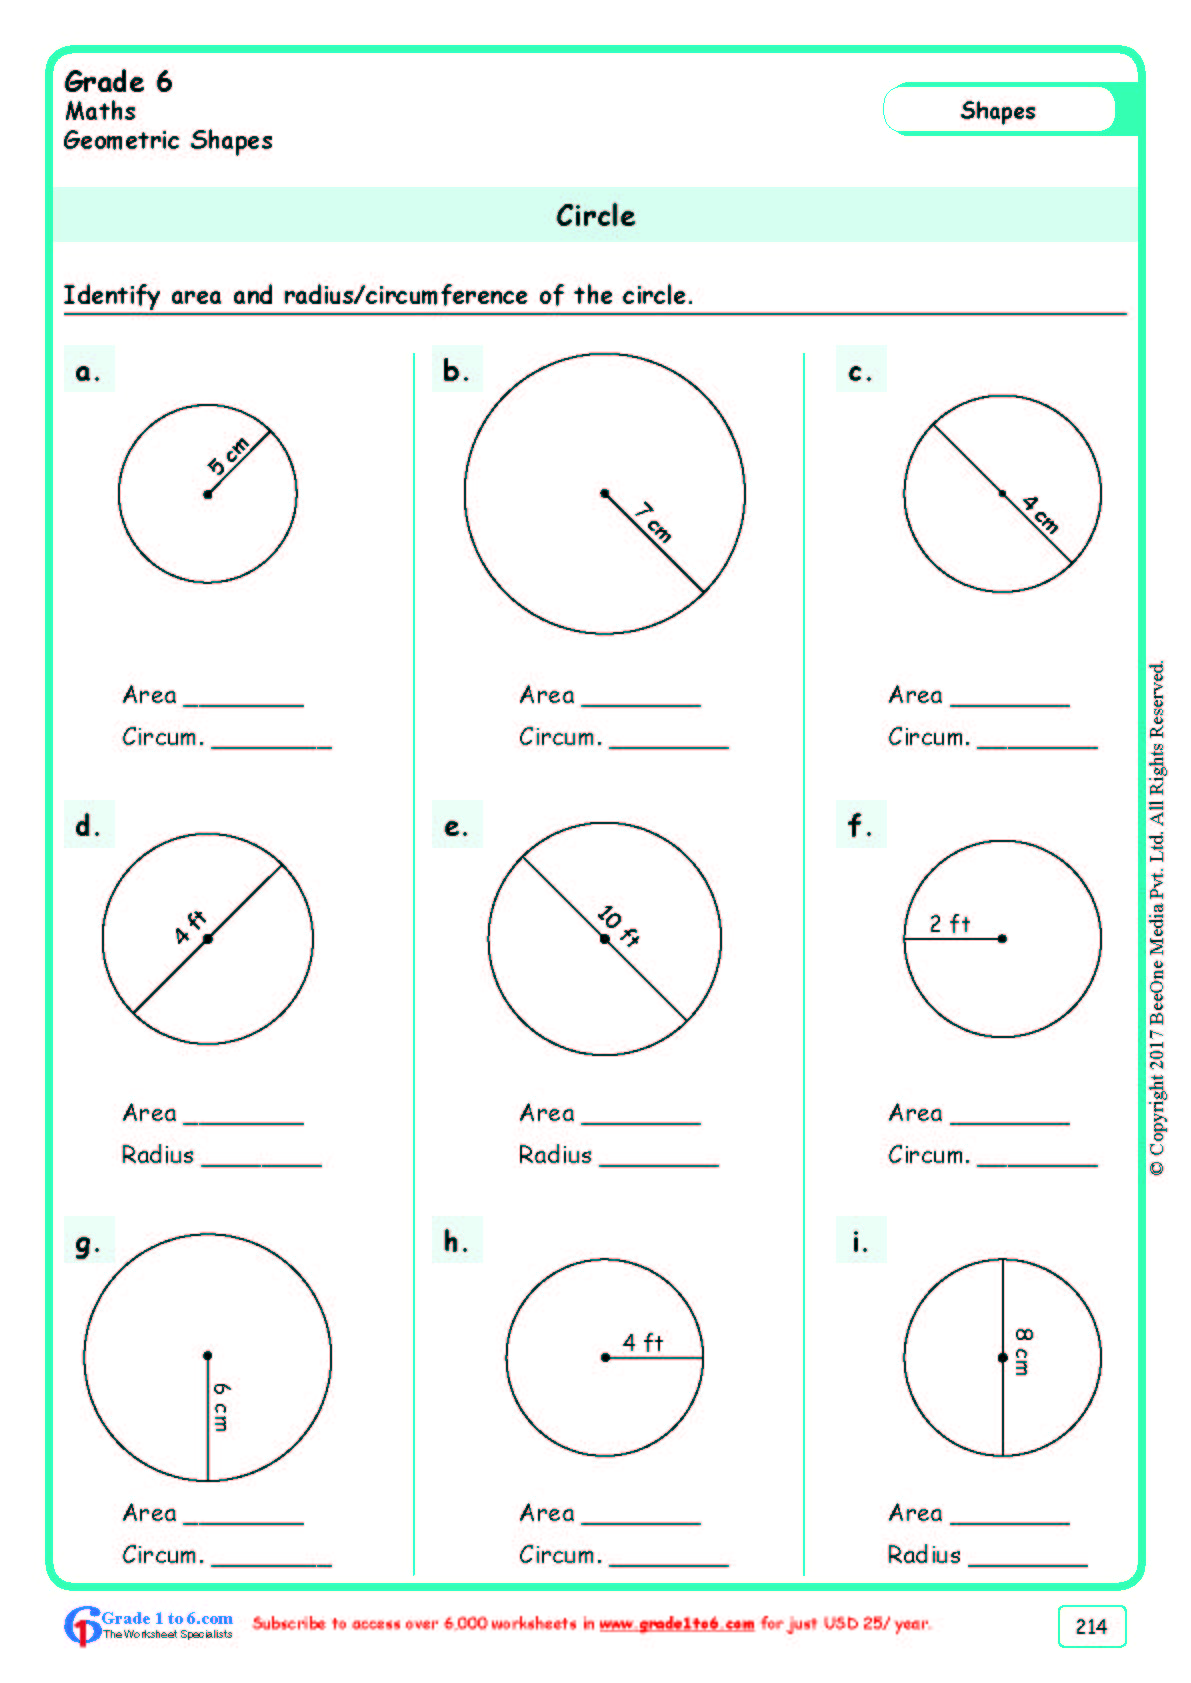 handout-about-calculating-the-area-of-quadrants-semicircles-and-three-quarters-good-to-use-as